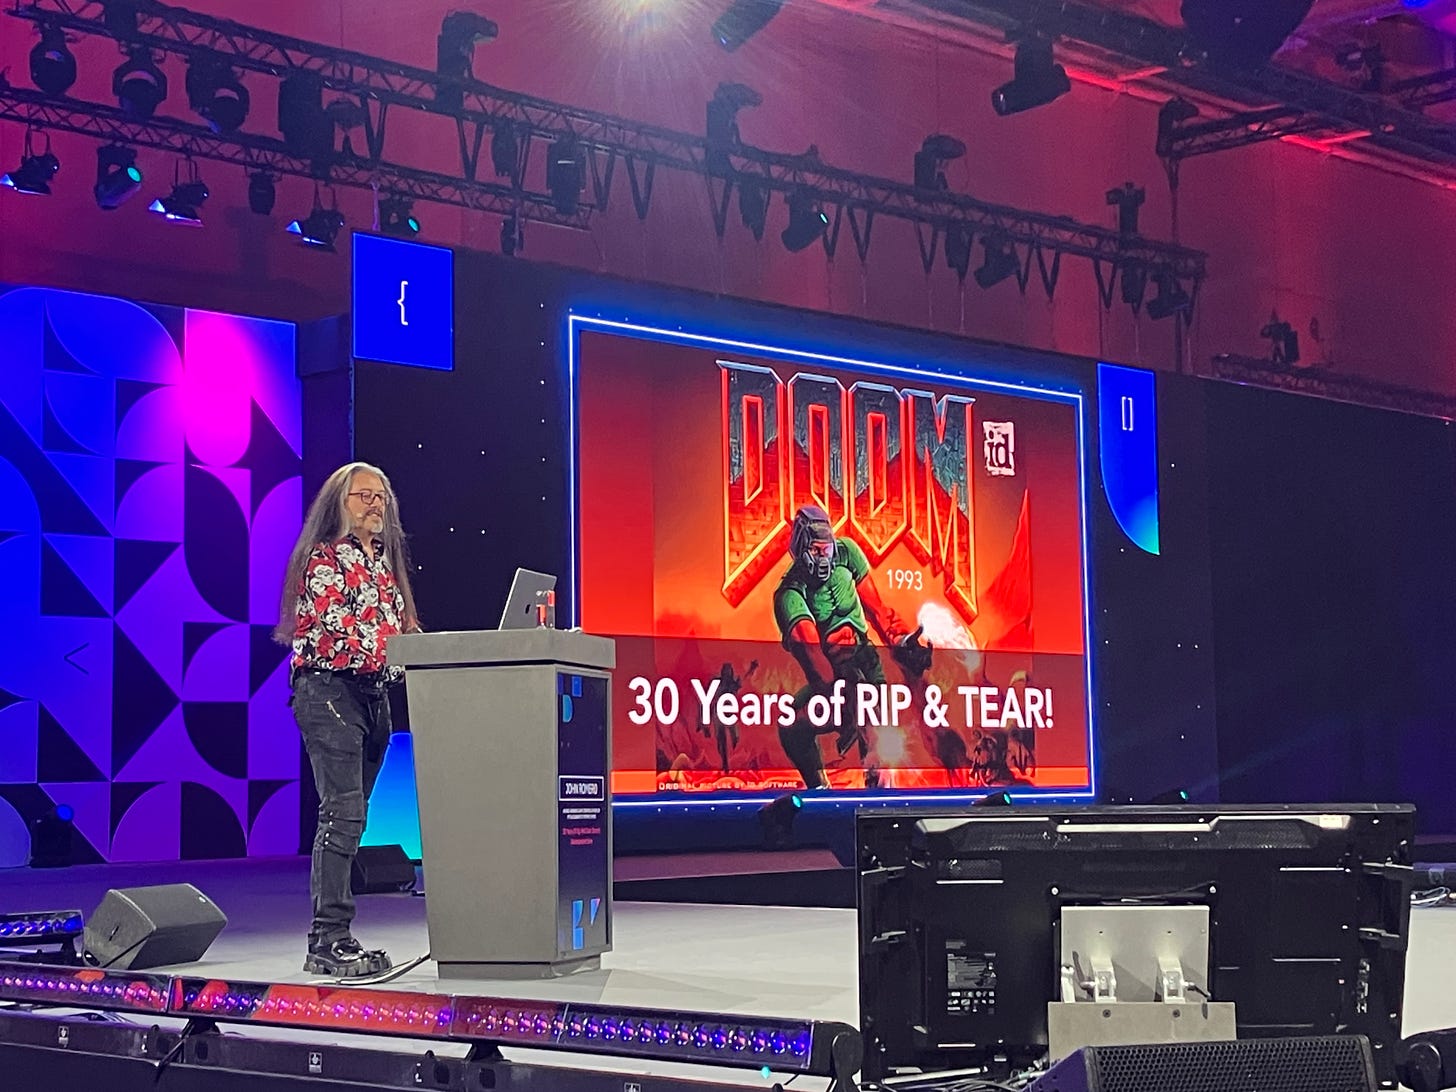 John Romero on stage, in front of a slide showing DOOM: 30 Years of RIP and TEAR. John wears a red and white floral shirt, black jeans, New Rock boots. He looks fabulous. 